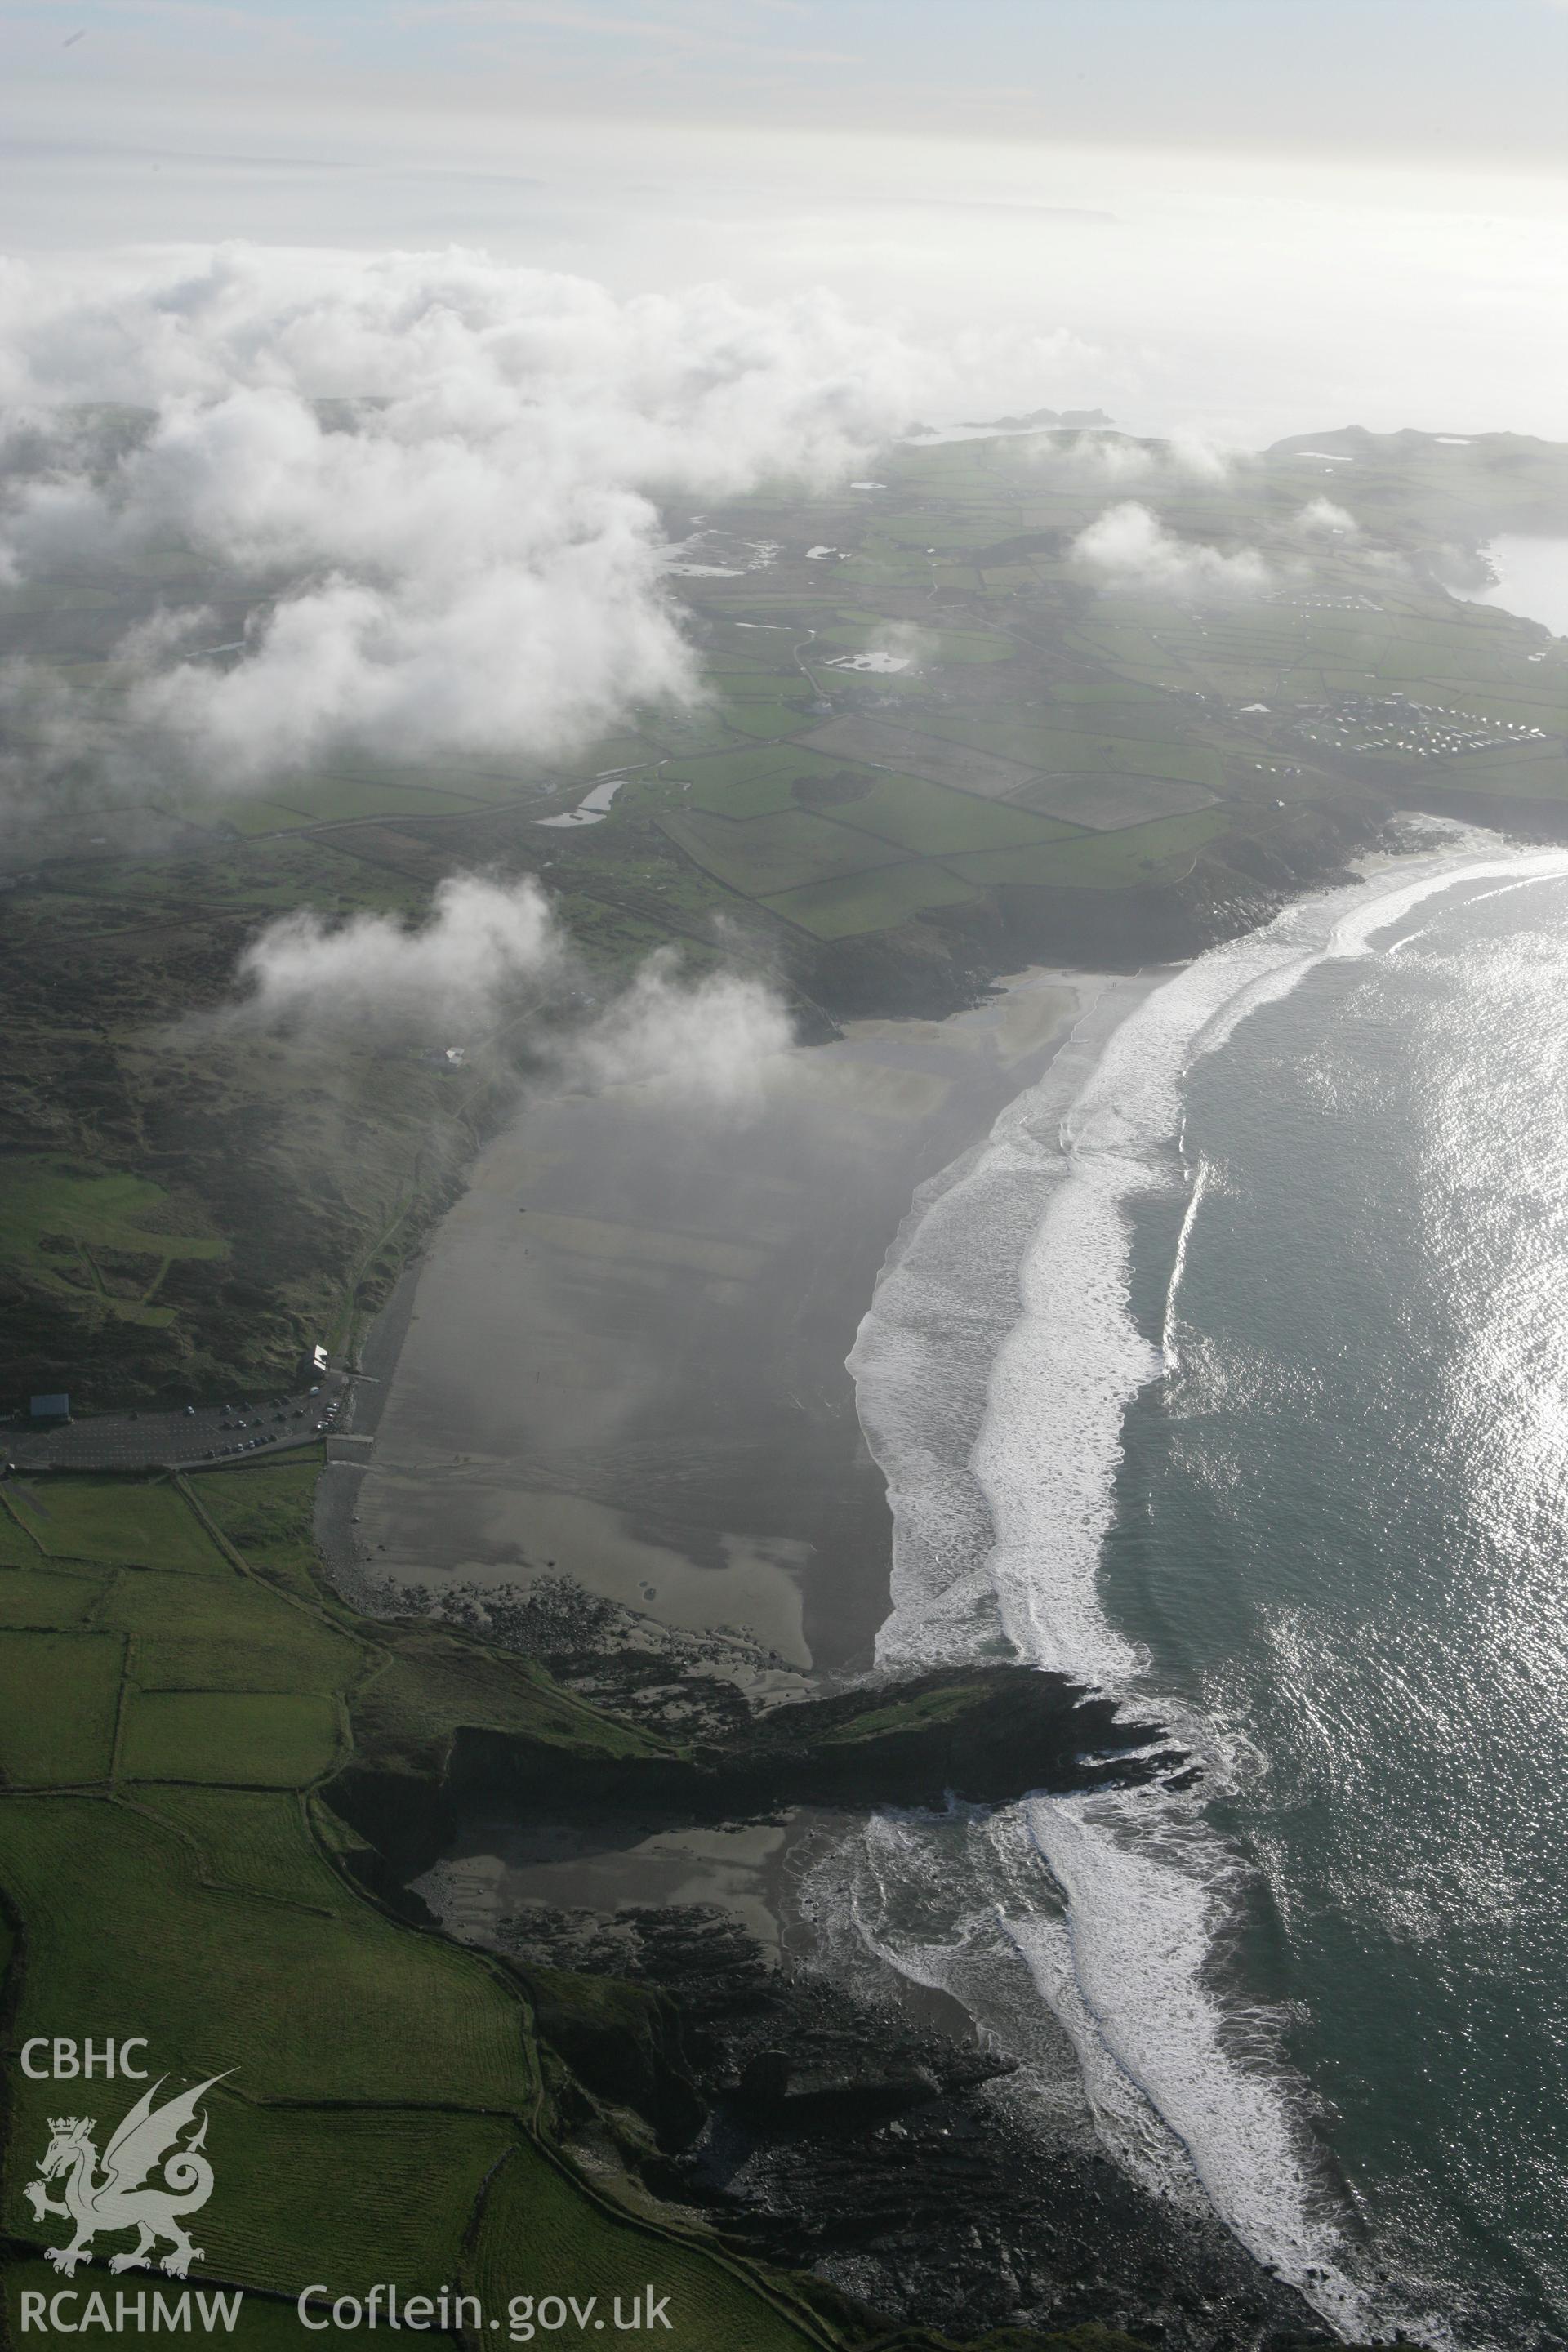 RCAHMW colour oblique aerial photograph of Whitesands Bay. A landscape view towards Ramsey Island, with clouds. Taken on 28 January 2009 by Toby Driver